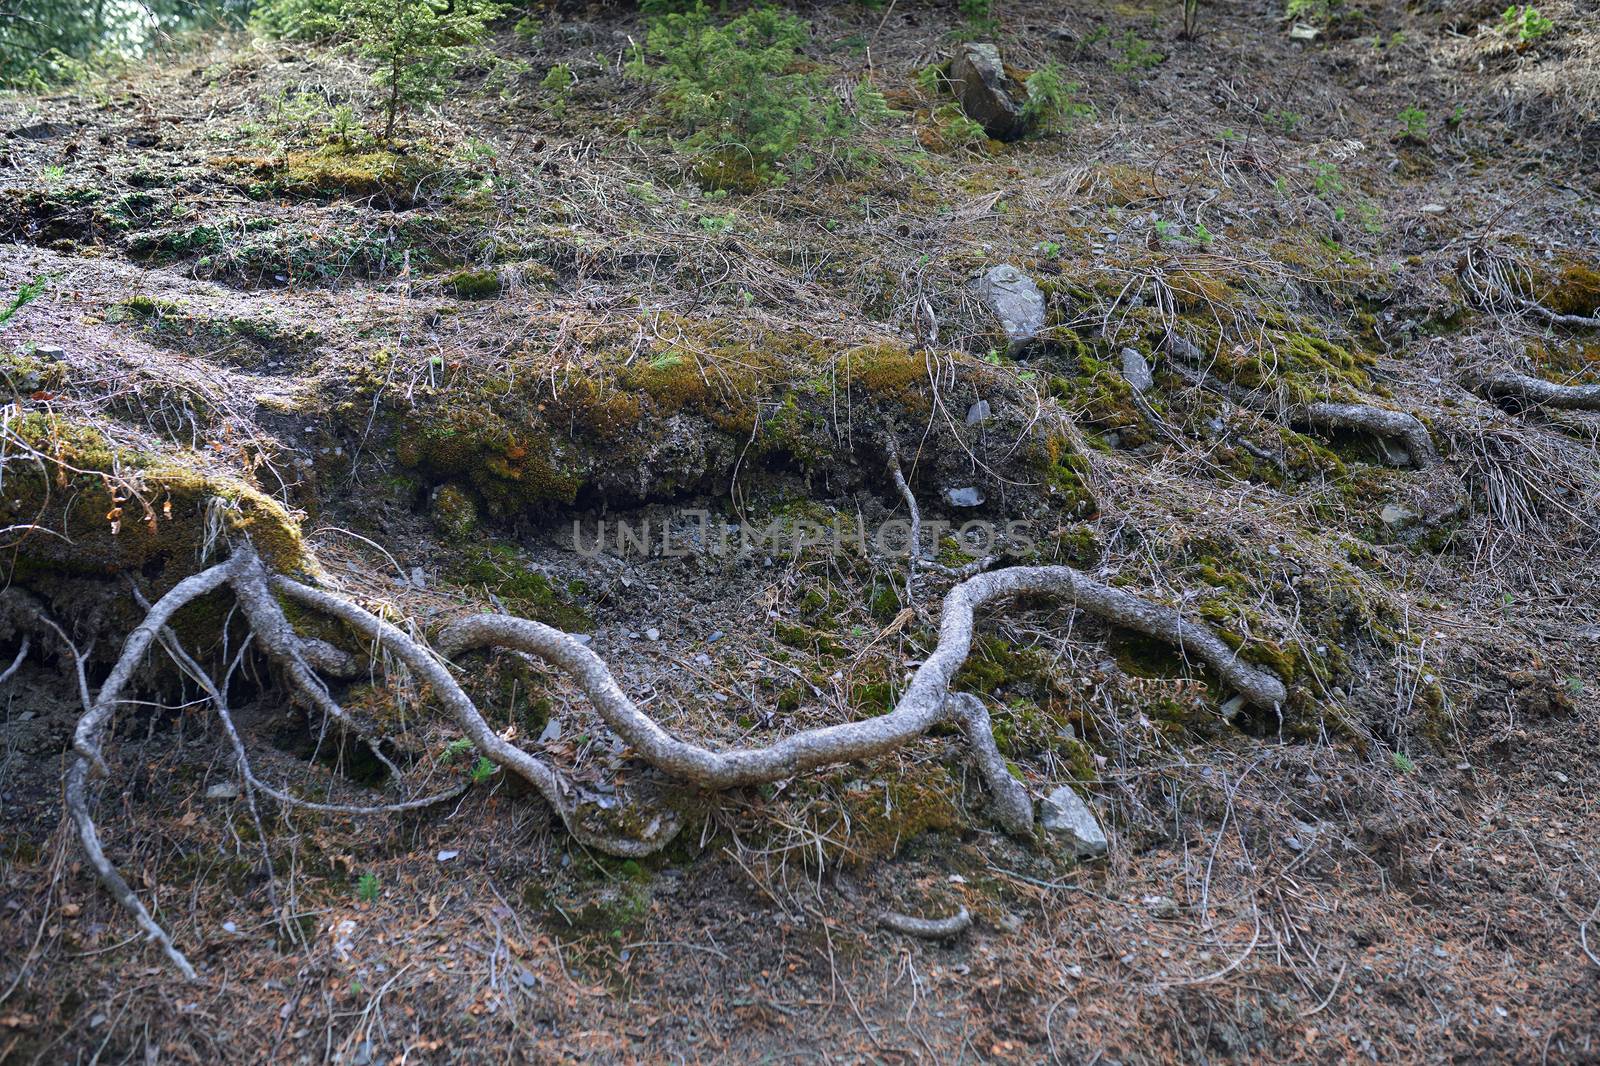 Roots of the old tree in deep forest